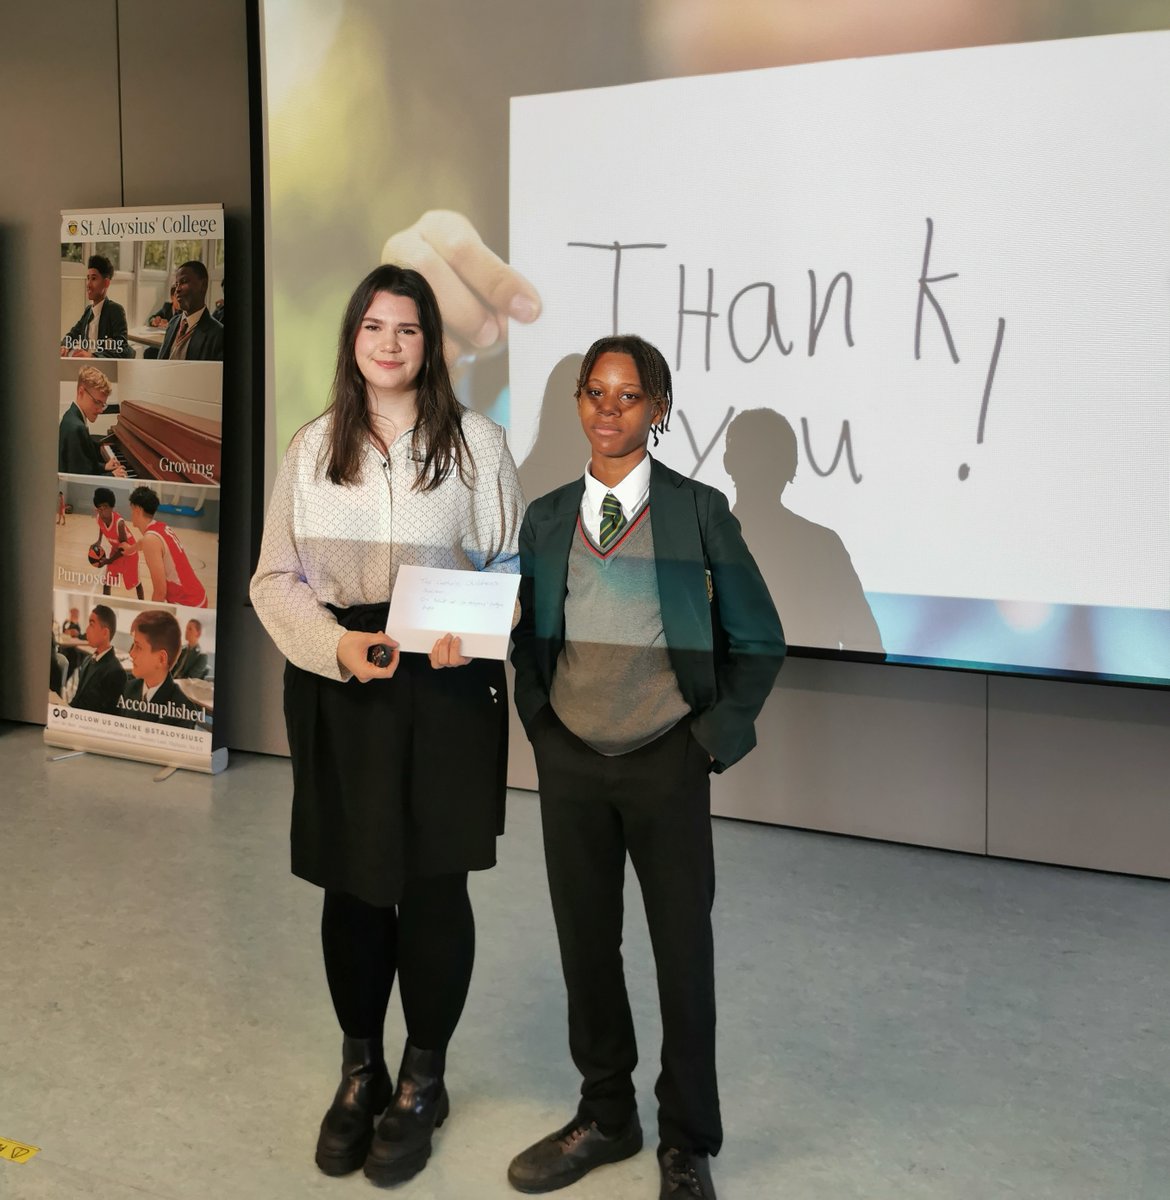 We partnered up with Catholic Social Services for a KS3 assembly on Tuesday. They are an agency 'guided by faith to care for and bring hope to people in need with humility & compassion.' Pictured is Tae Jauen who handed over a cheque to Emily from CSS on behalf of our school.